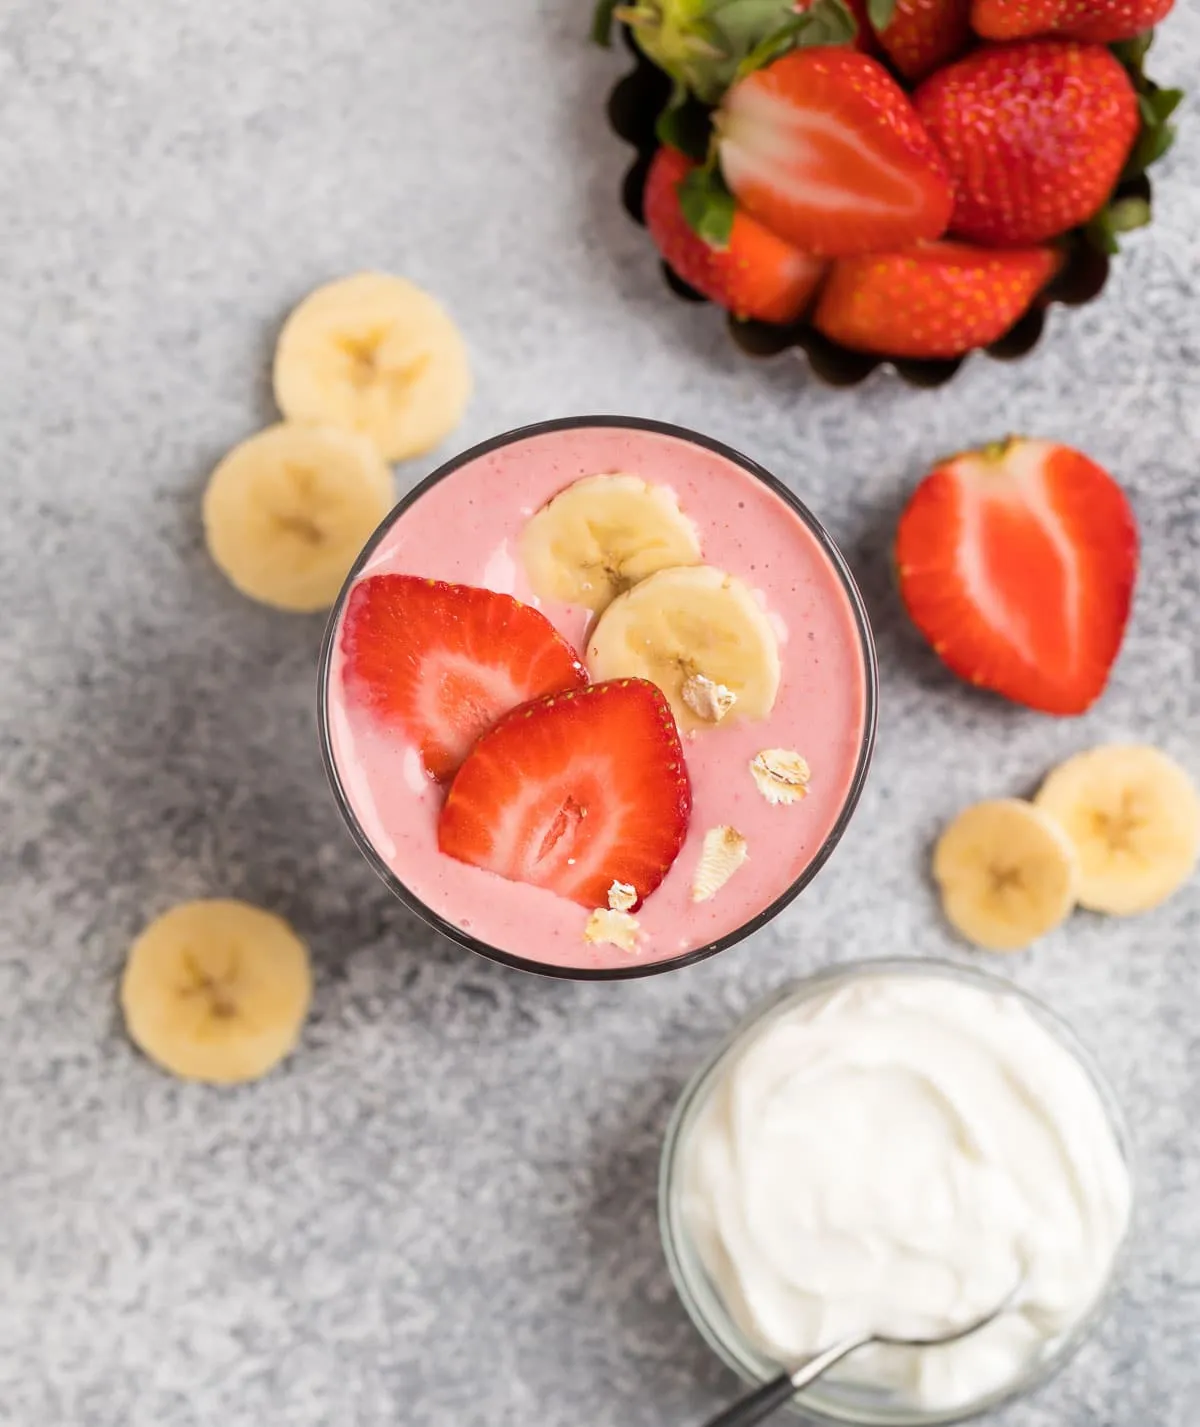 Peanut butter Greek yogurt smoothie served in a glass with fresh strawberries and bananas